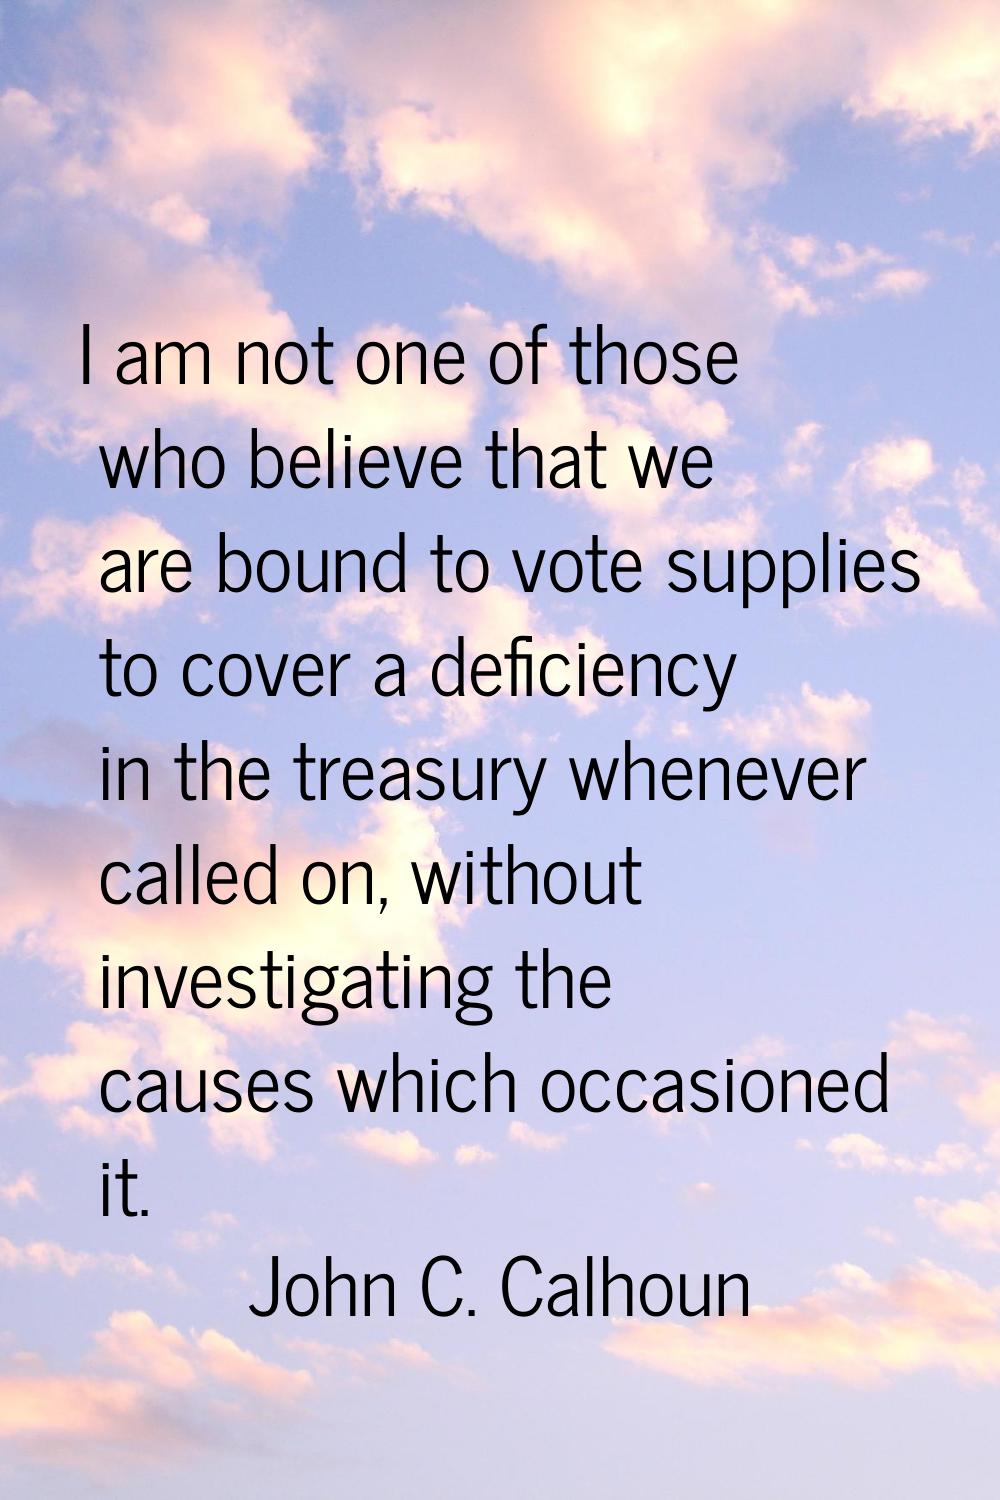 I am not one of those who believe that we are bound to vote supplies to cover a deficiency in the t